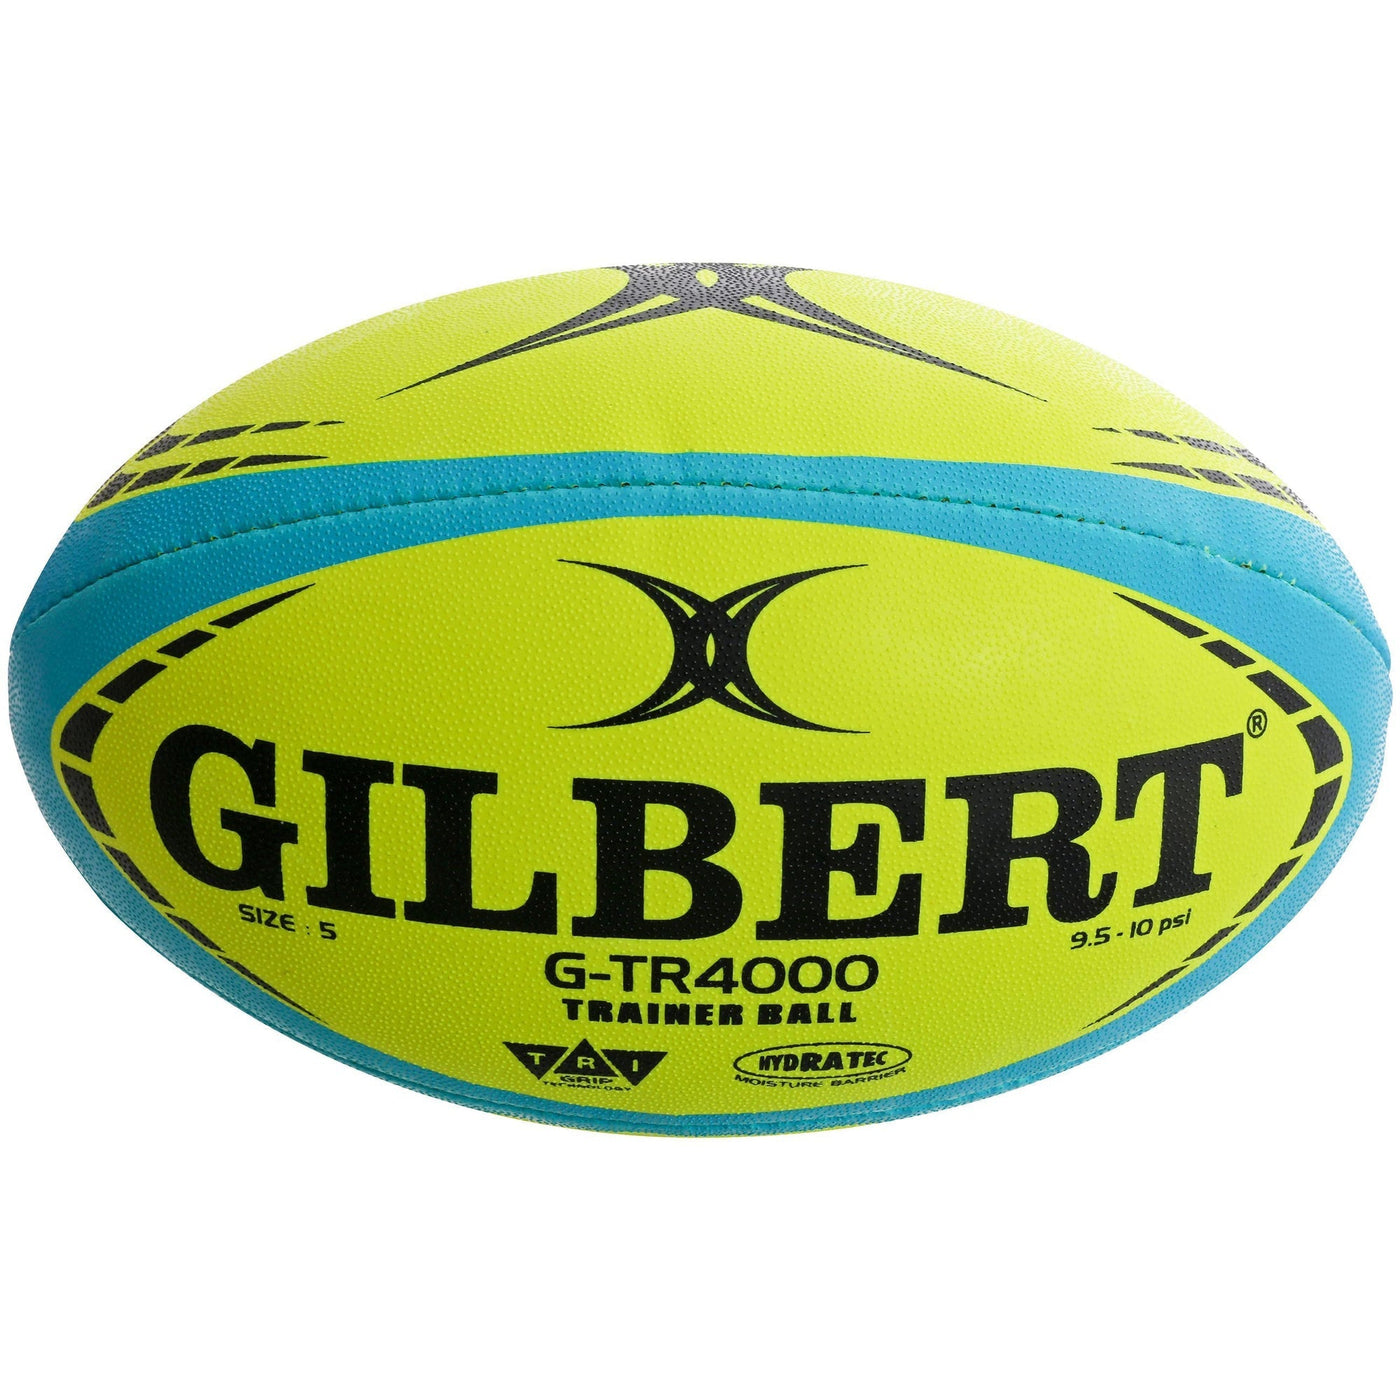 G-TR4000 Ballon Rugby Jaune Fluo Taille 3